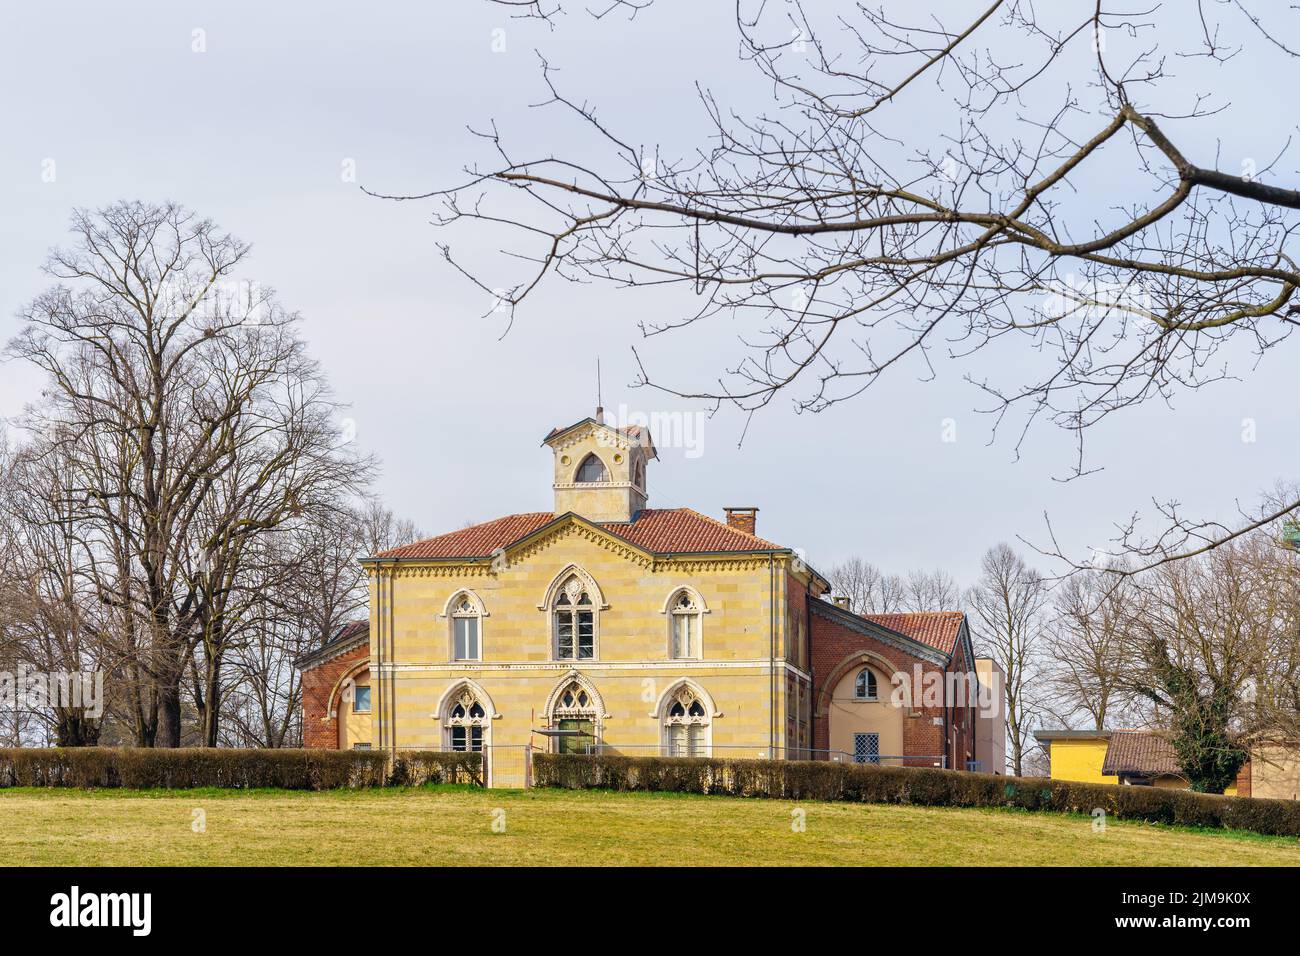 View of the Cascina San Fedele building in the Monza Park, on a clear winter day. Monza, Lombardy, Northern Italy Stock Photo